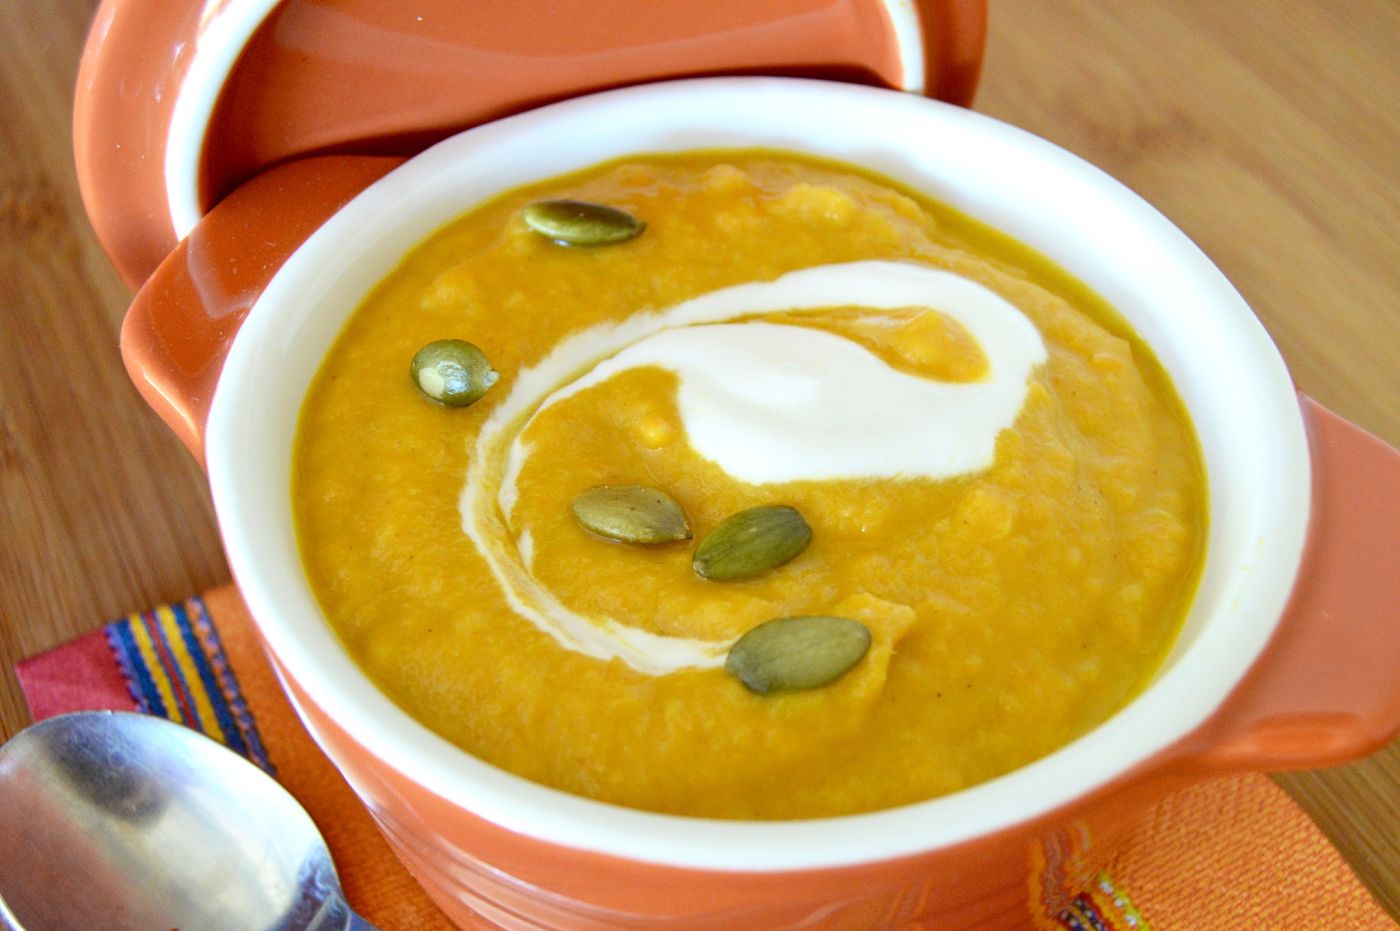 A tweak on a traditional soup, this Ginger Sweet Potato Carrot Soup hits on all flavor senses. A little bit tropical with the Ginger and Coconut Milk, but ALL comfort with the sweet potatoes and carrots. Perfect soup to make ahead and bring to a potluck, work meeting or to serve lunch with a friend at home!